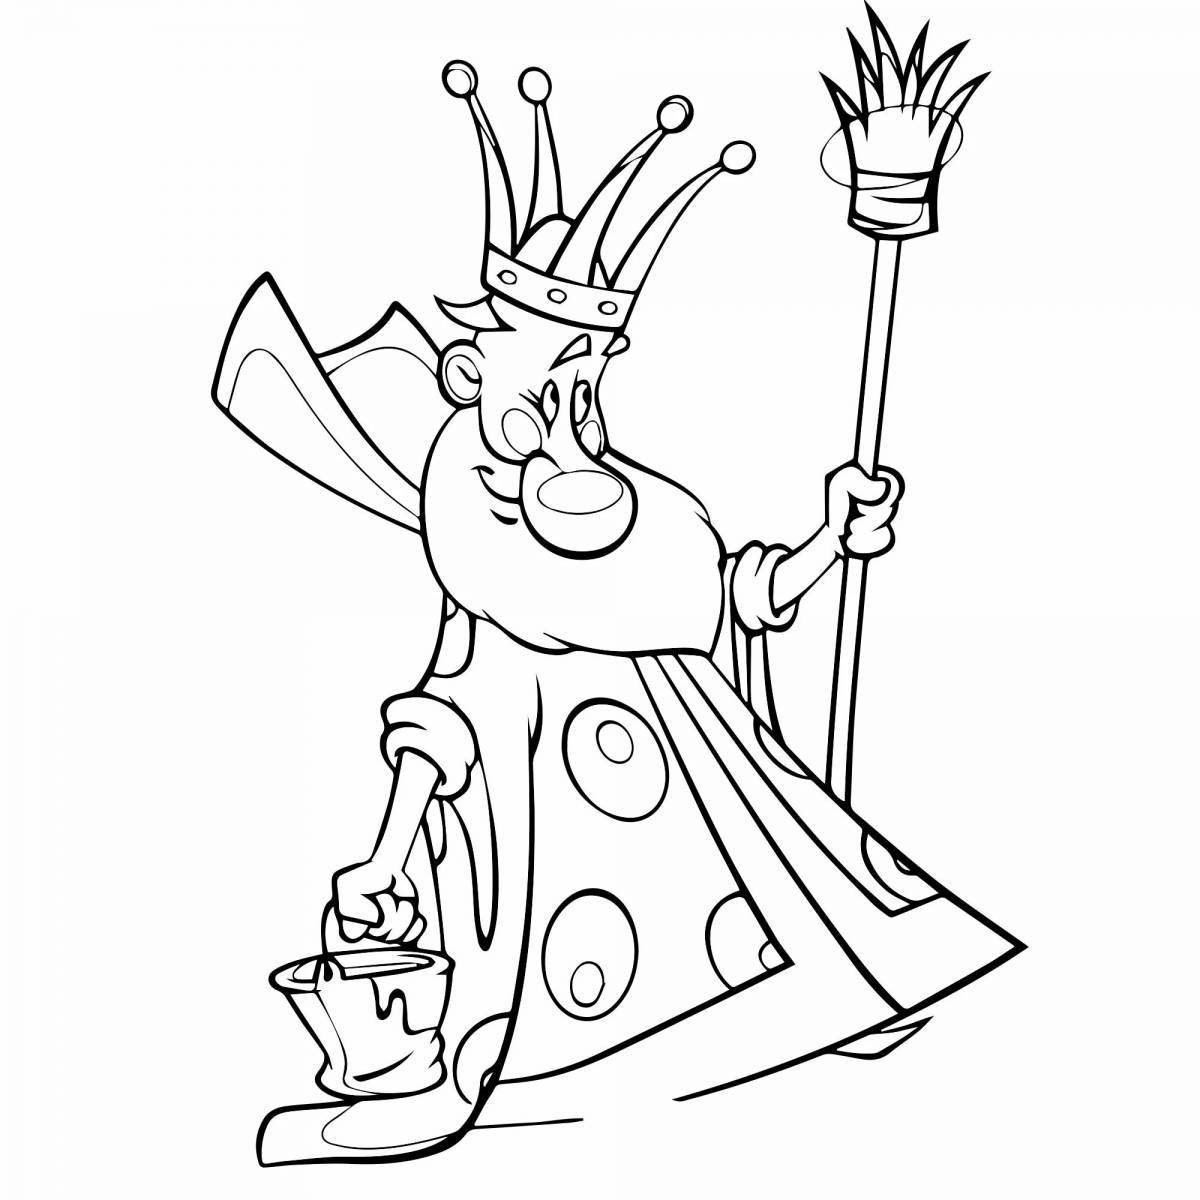 Glorious king coloring pages for kids